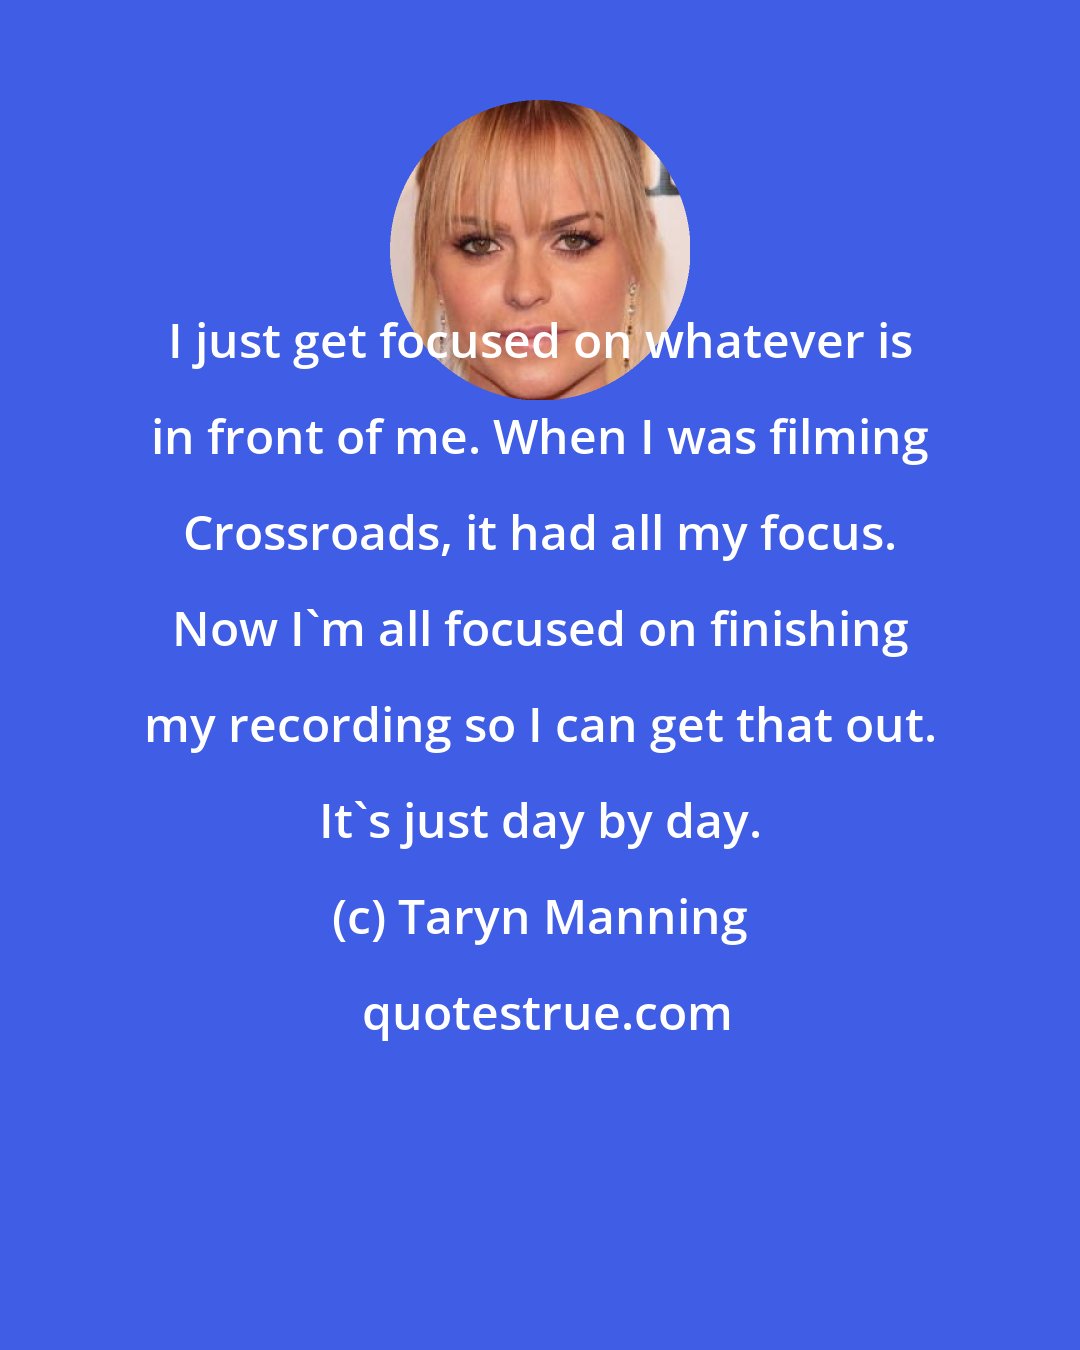 Taryn Manning: I just get focused on whatever is in front of me. When I was filming Crossroads, it had all my focus. Now I'm all focused on finishing my recording so I can get that out. It's just day by day.